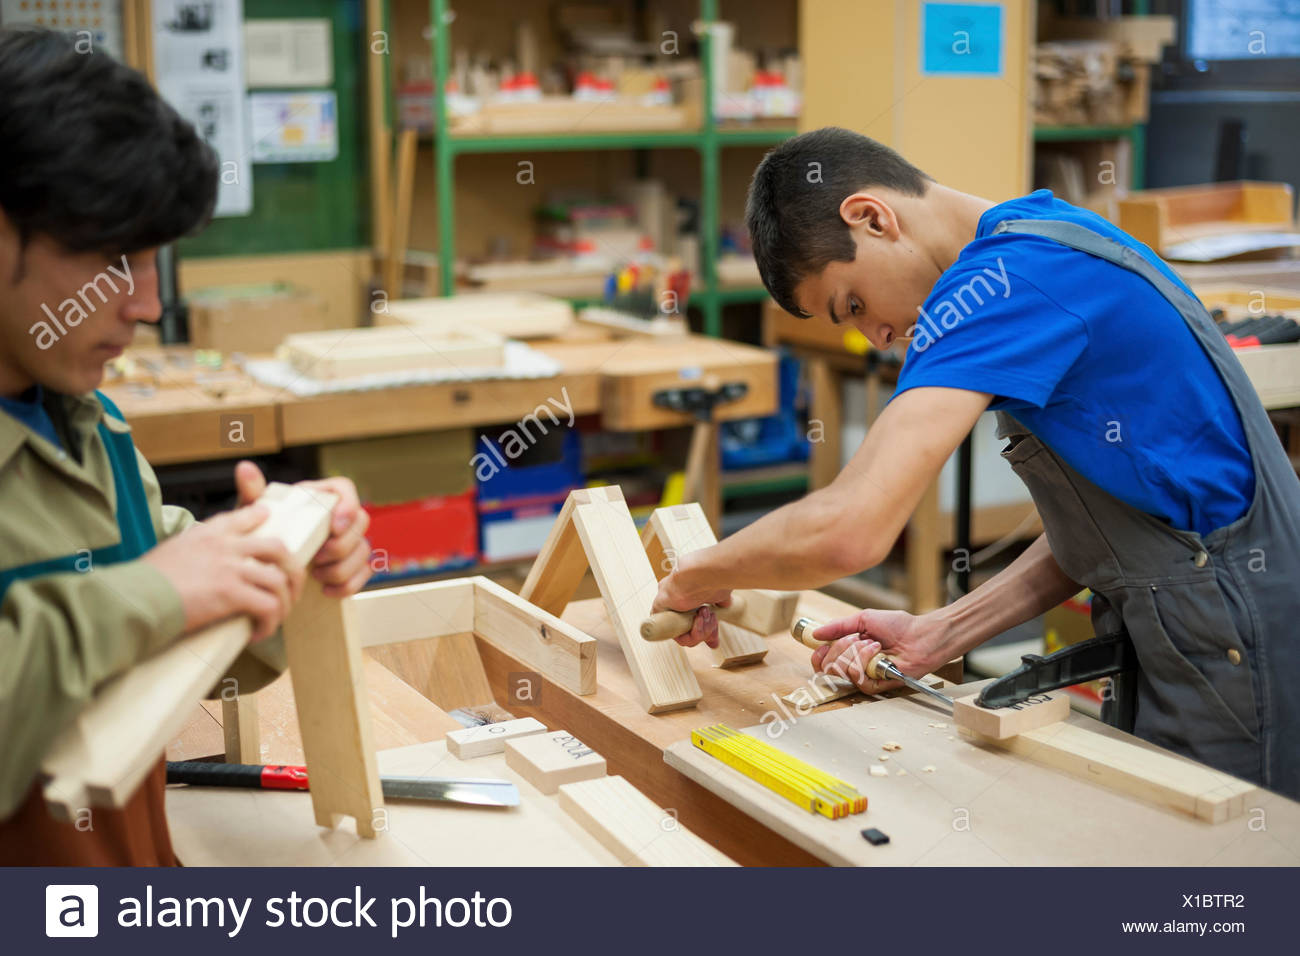 Vocational School Students Working In A Carpenter S Workshop Stock Photo Alamy